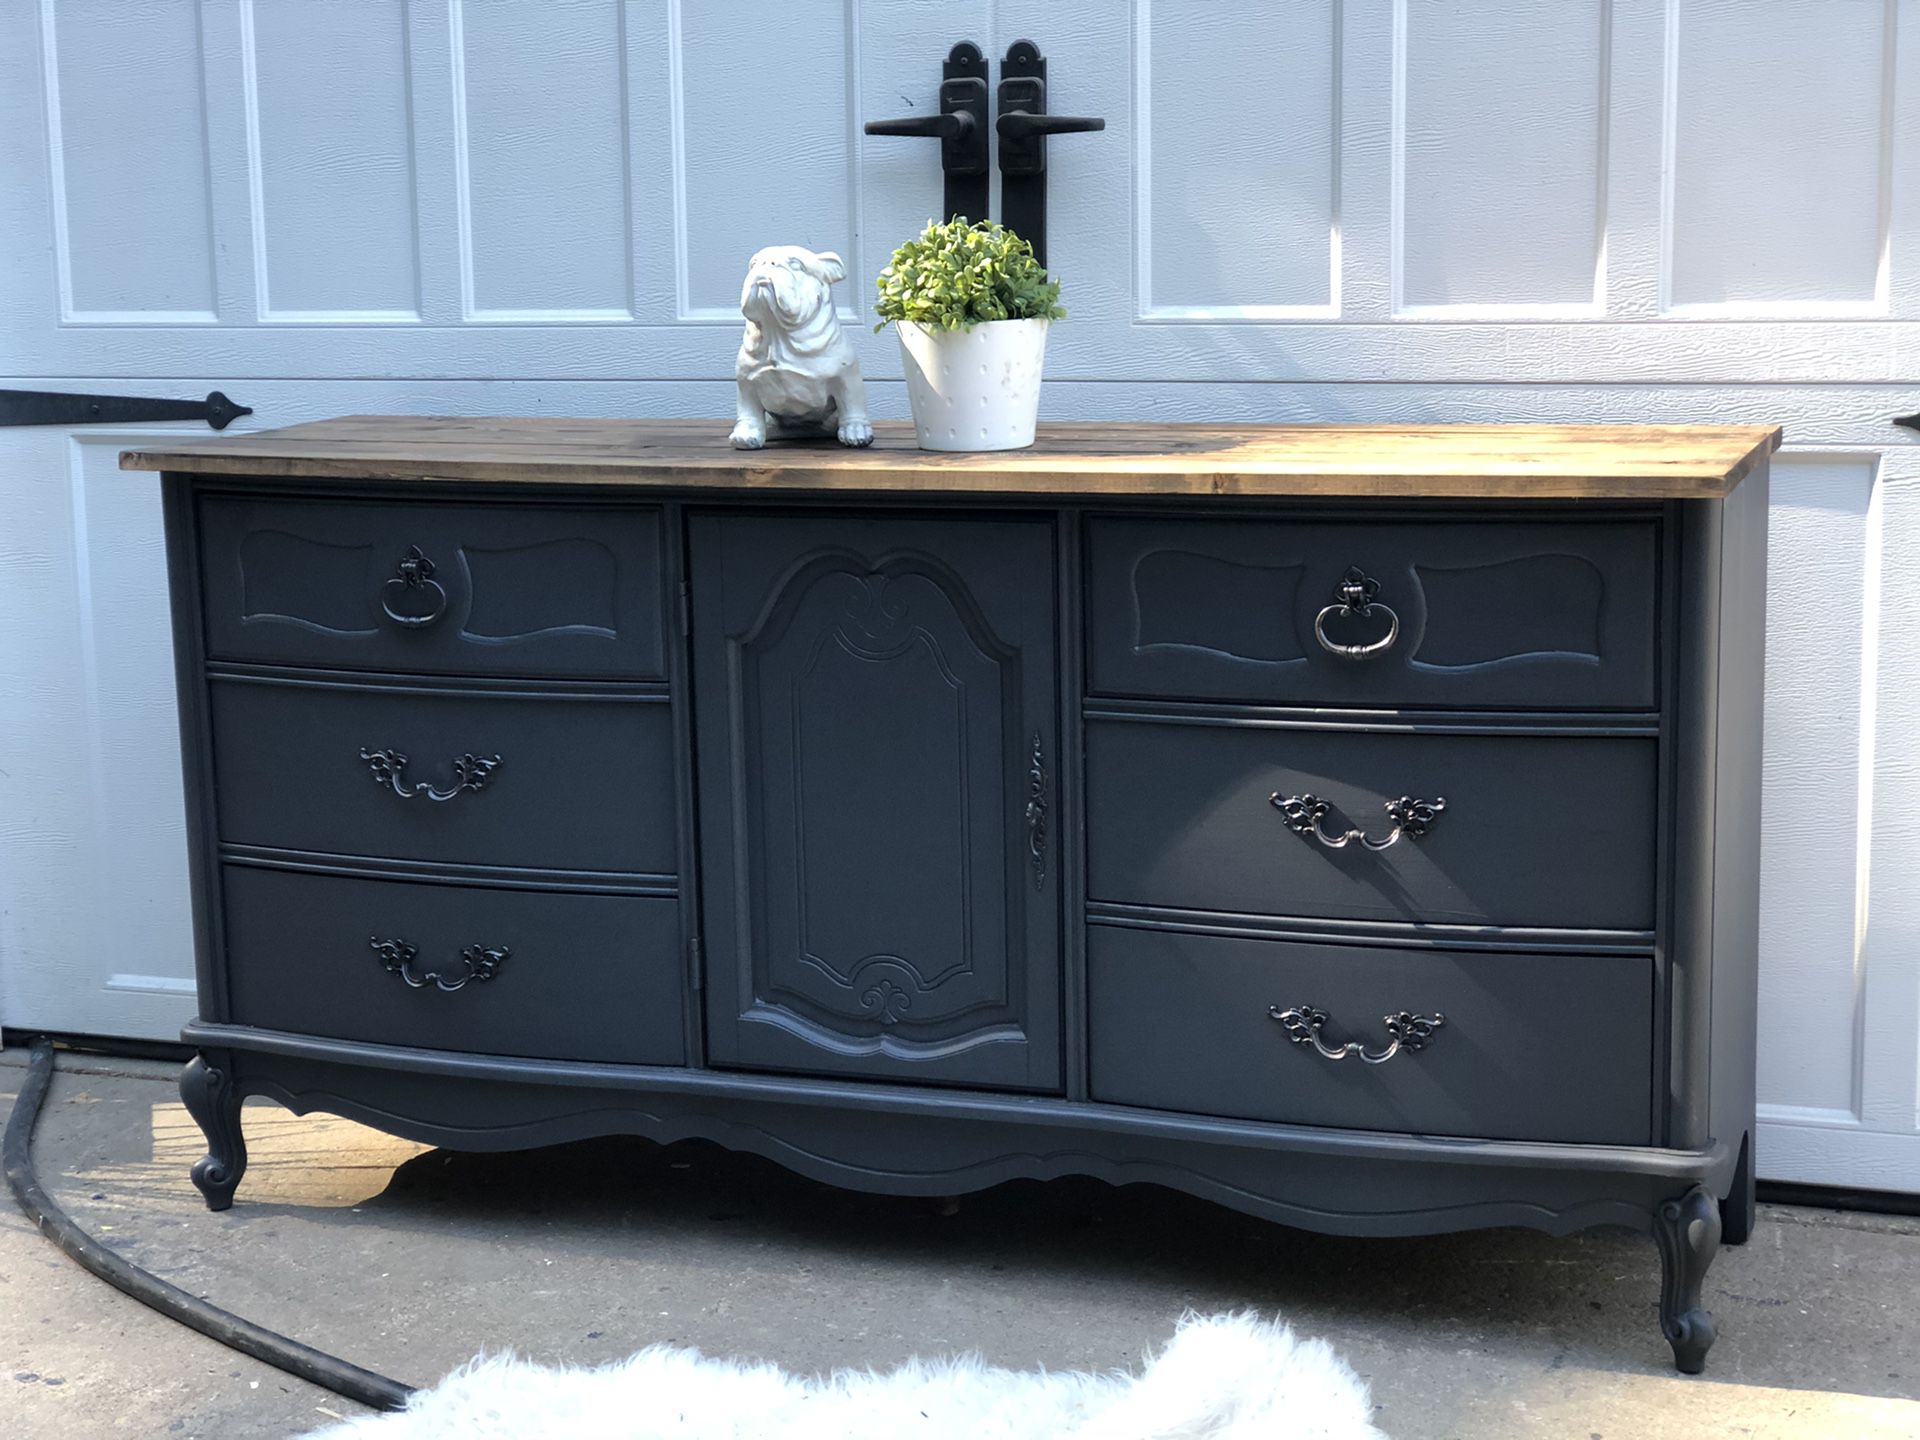 Gray French provincial dresser, with barn wood on top